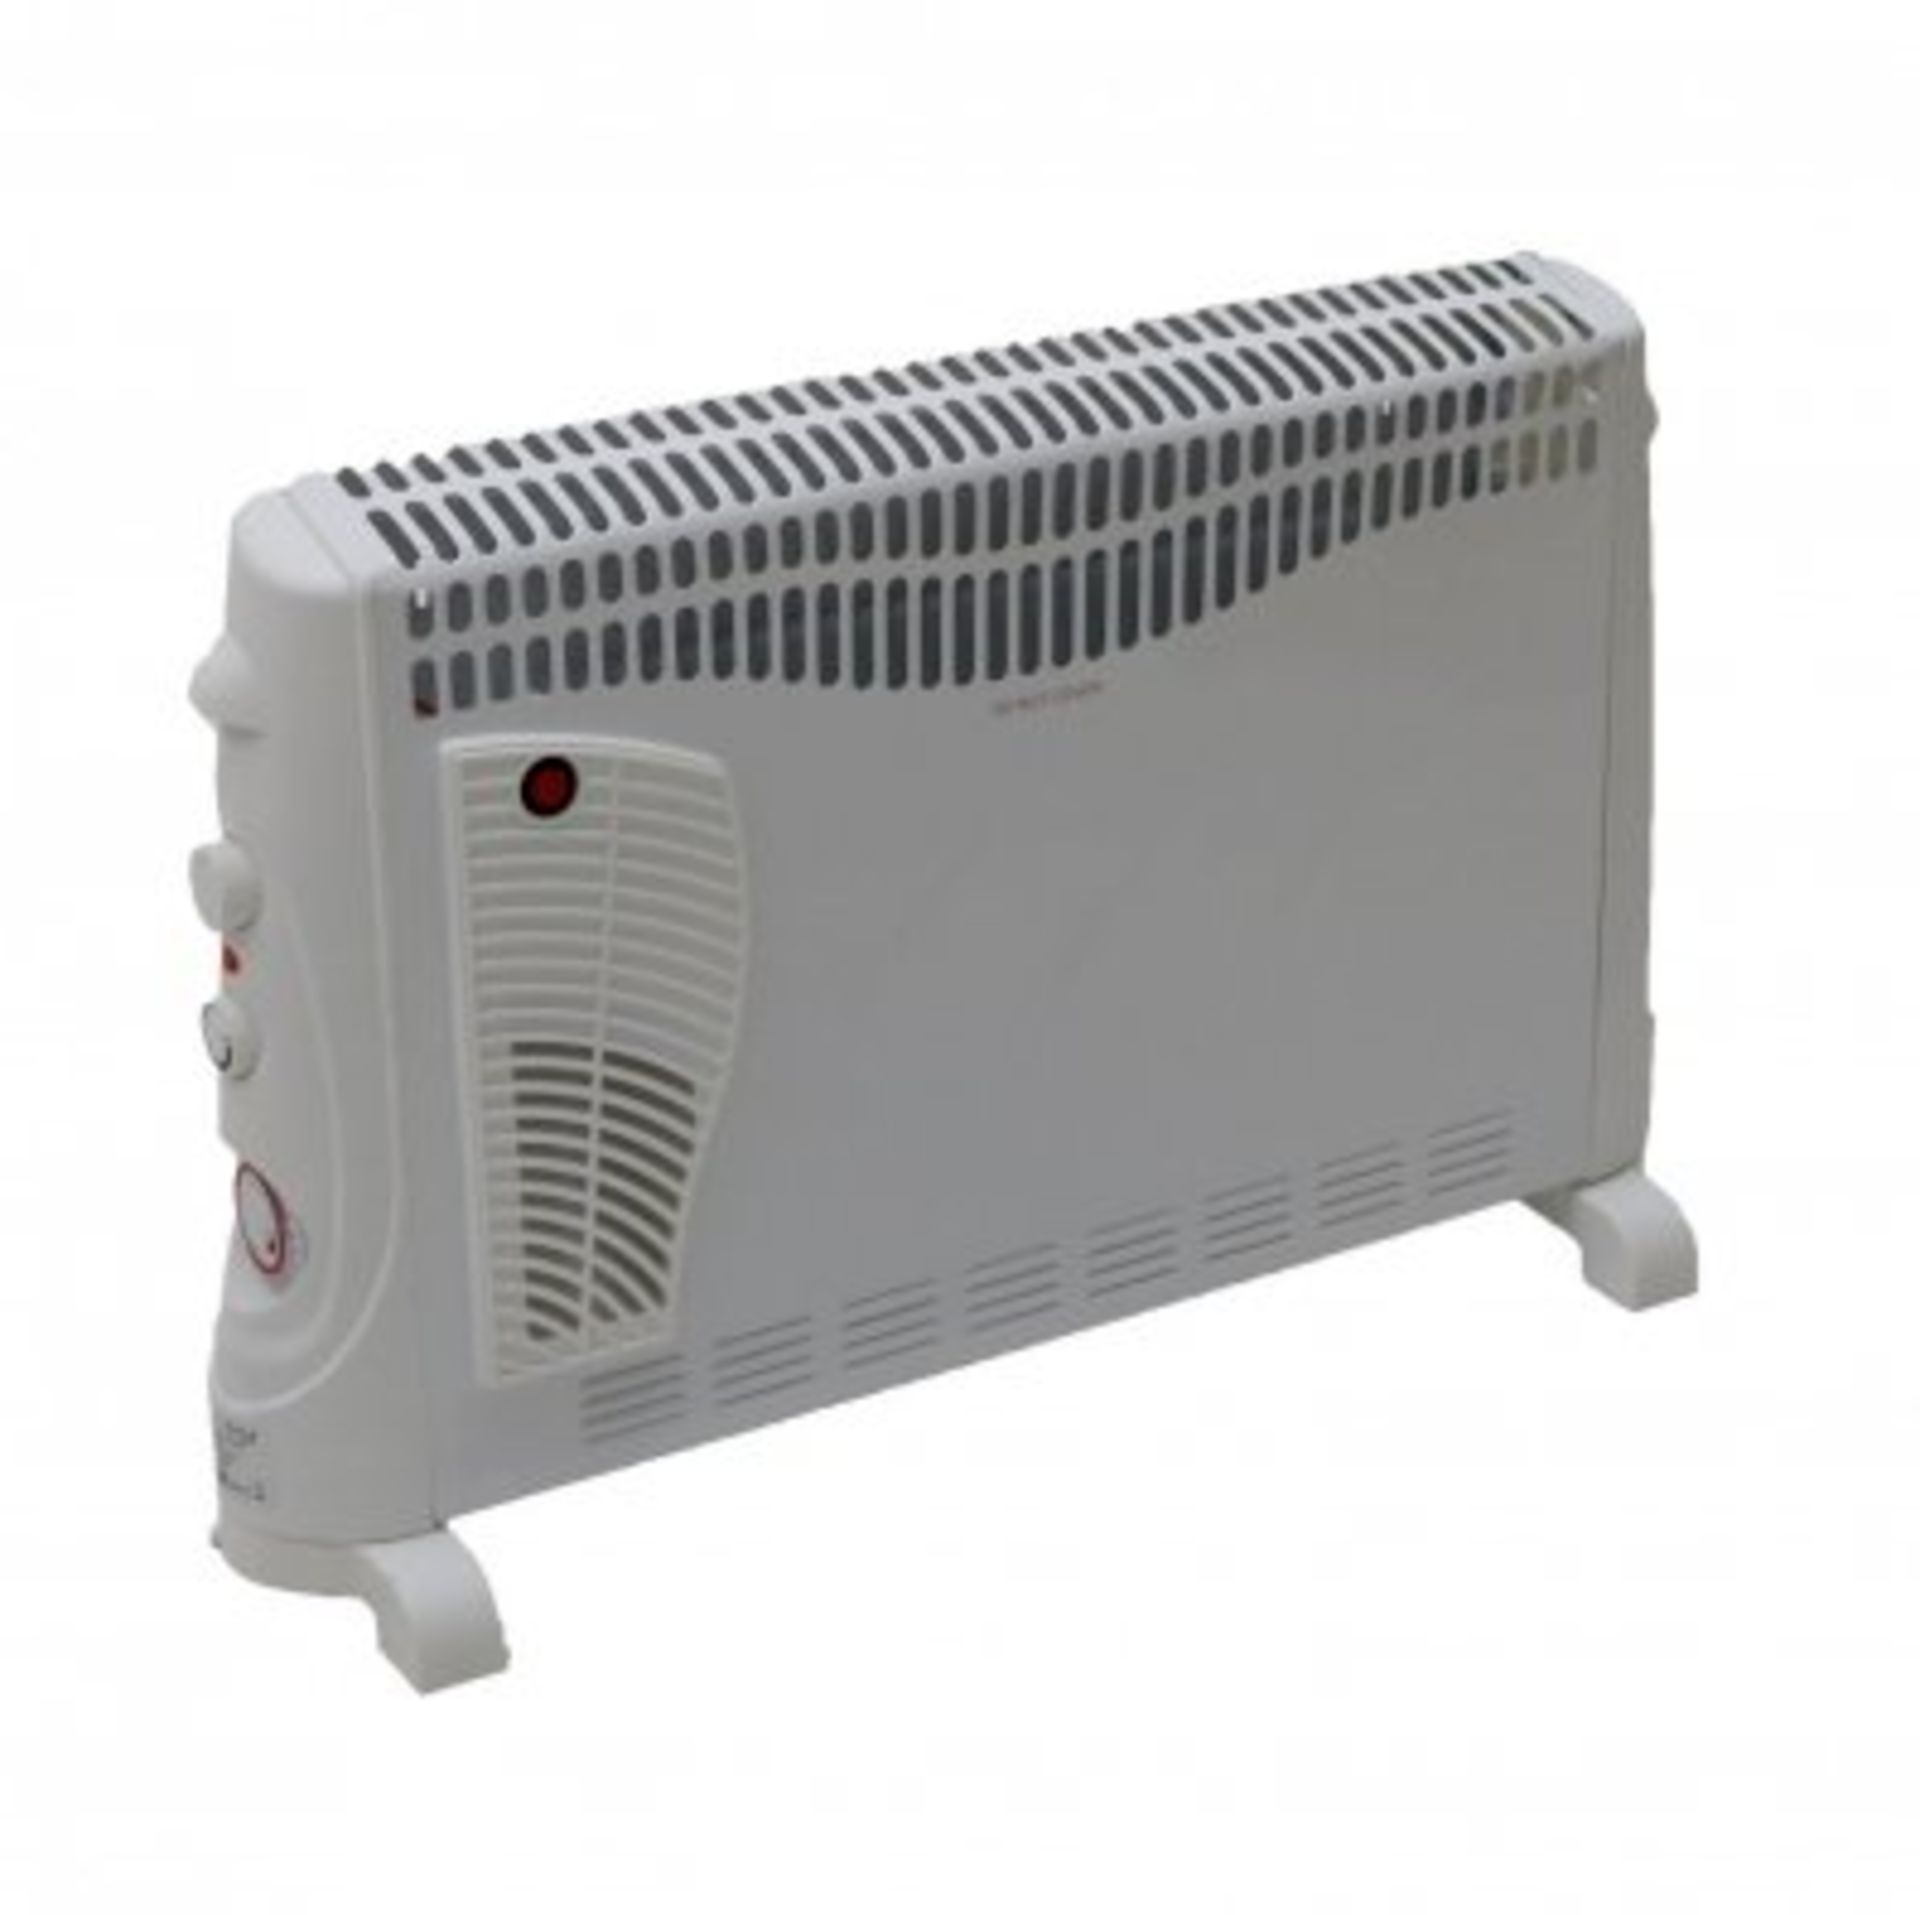 (SP493) 2kW Convector Heater - 3 Heat Settings, Turbo and Timer Stay warm this year with the...